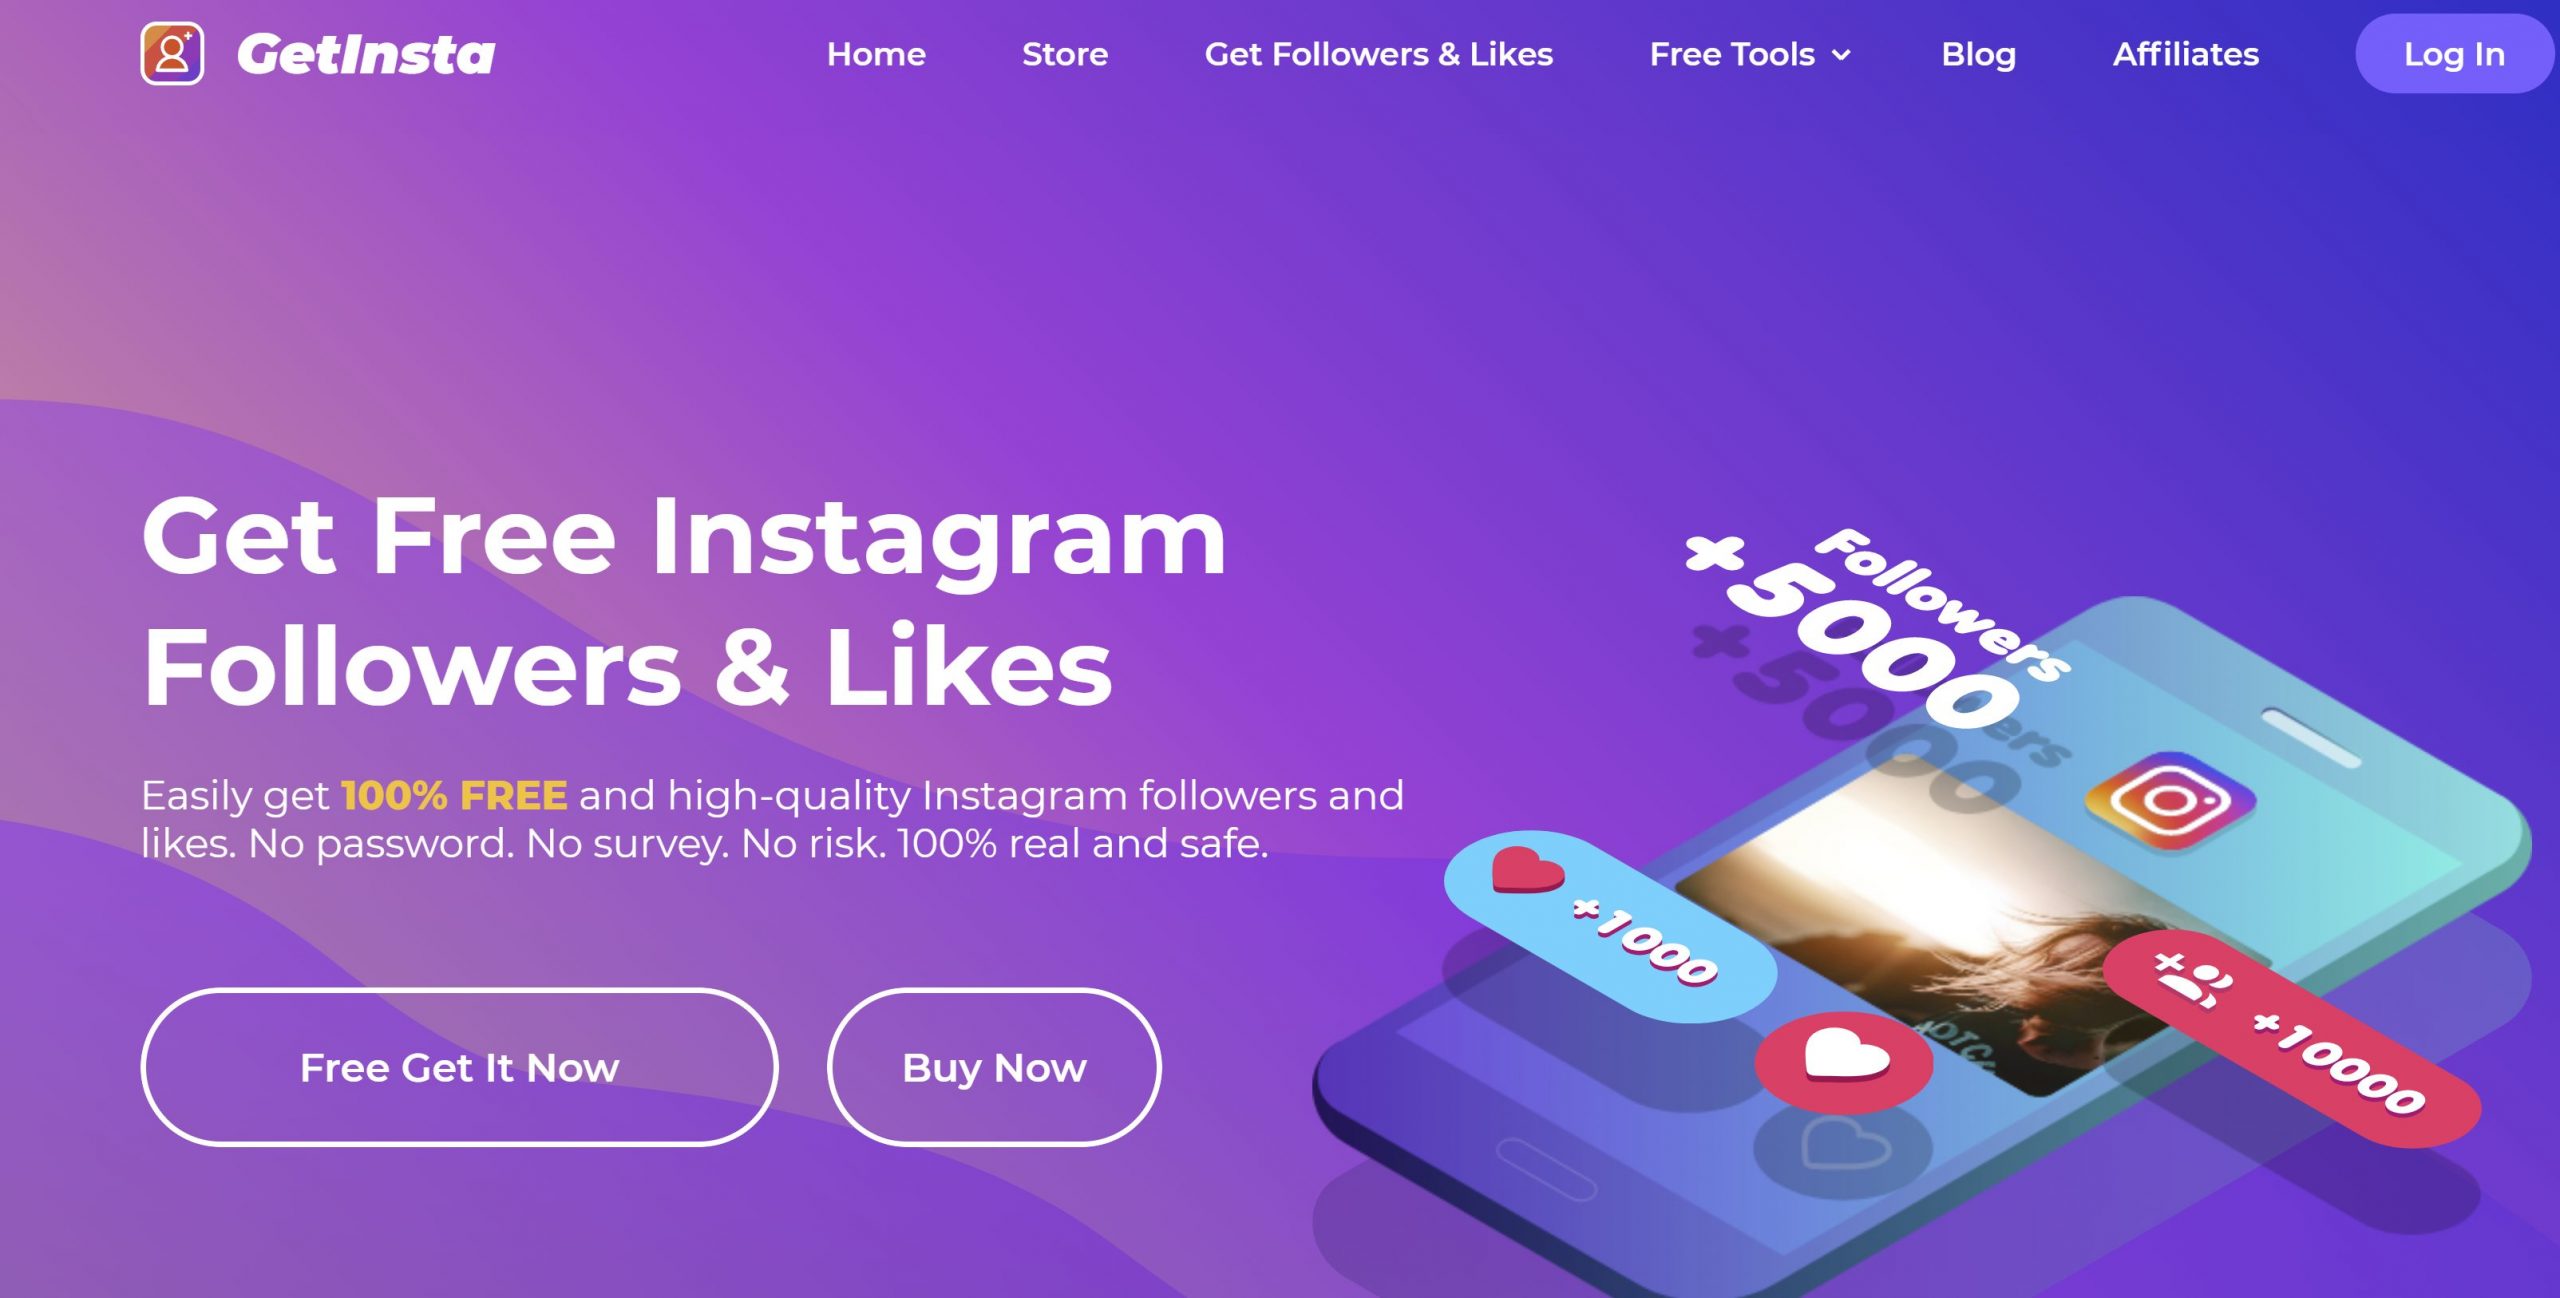 Get easy Instagram Followers and Likes with help of GetInsta | Meldium